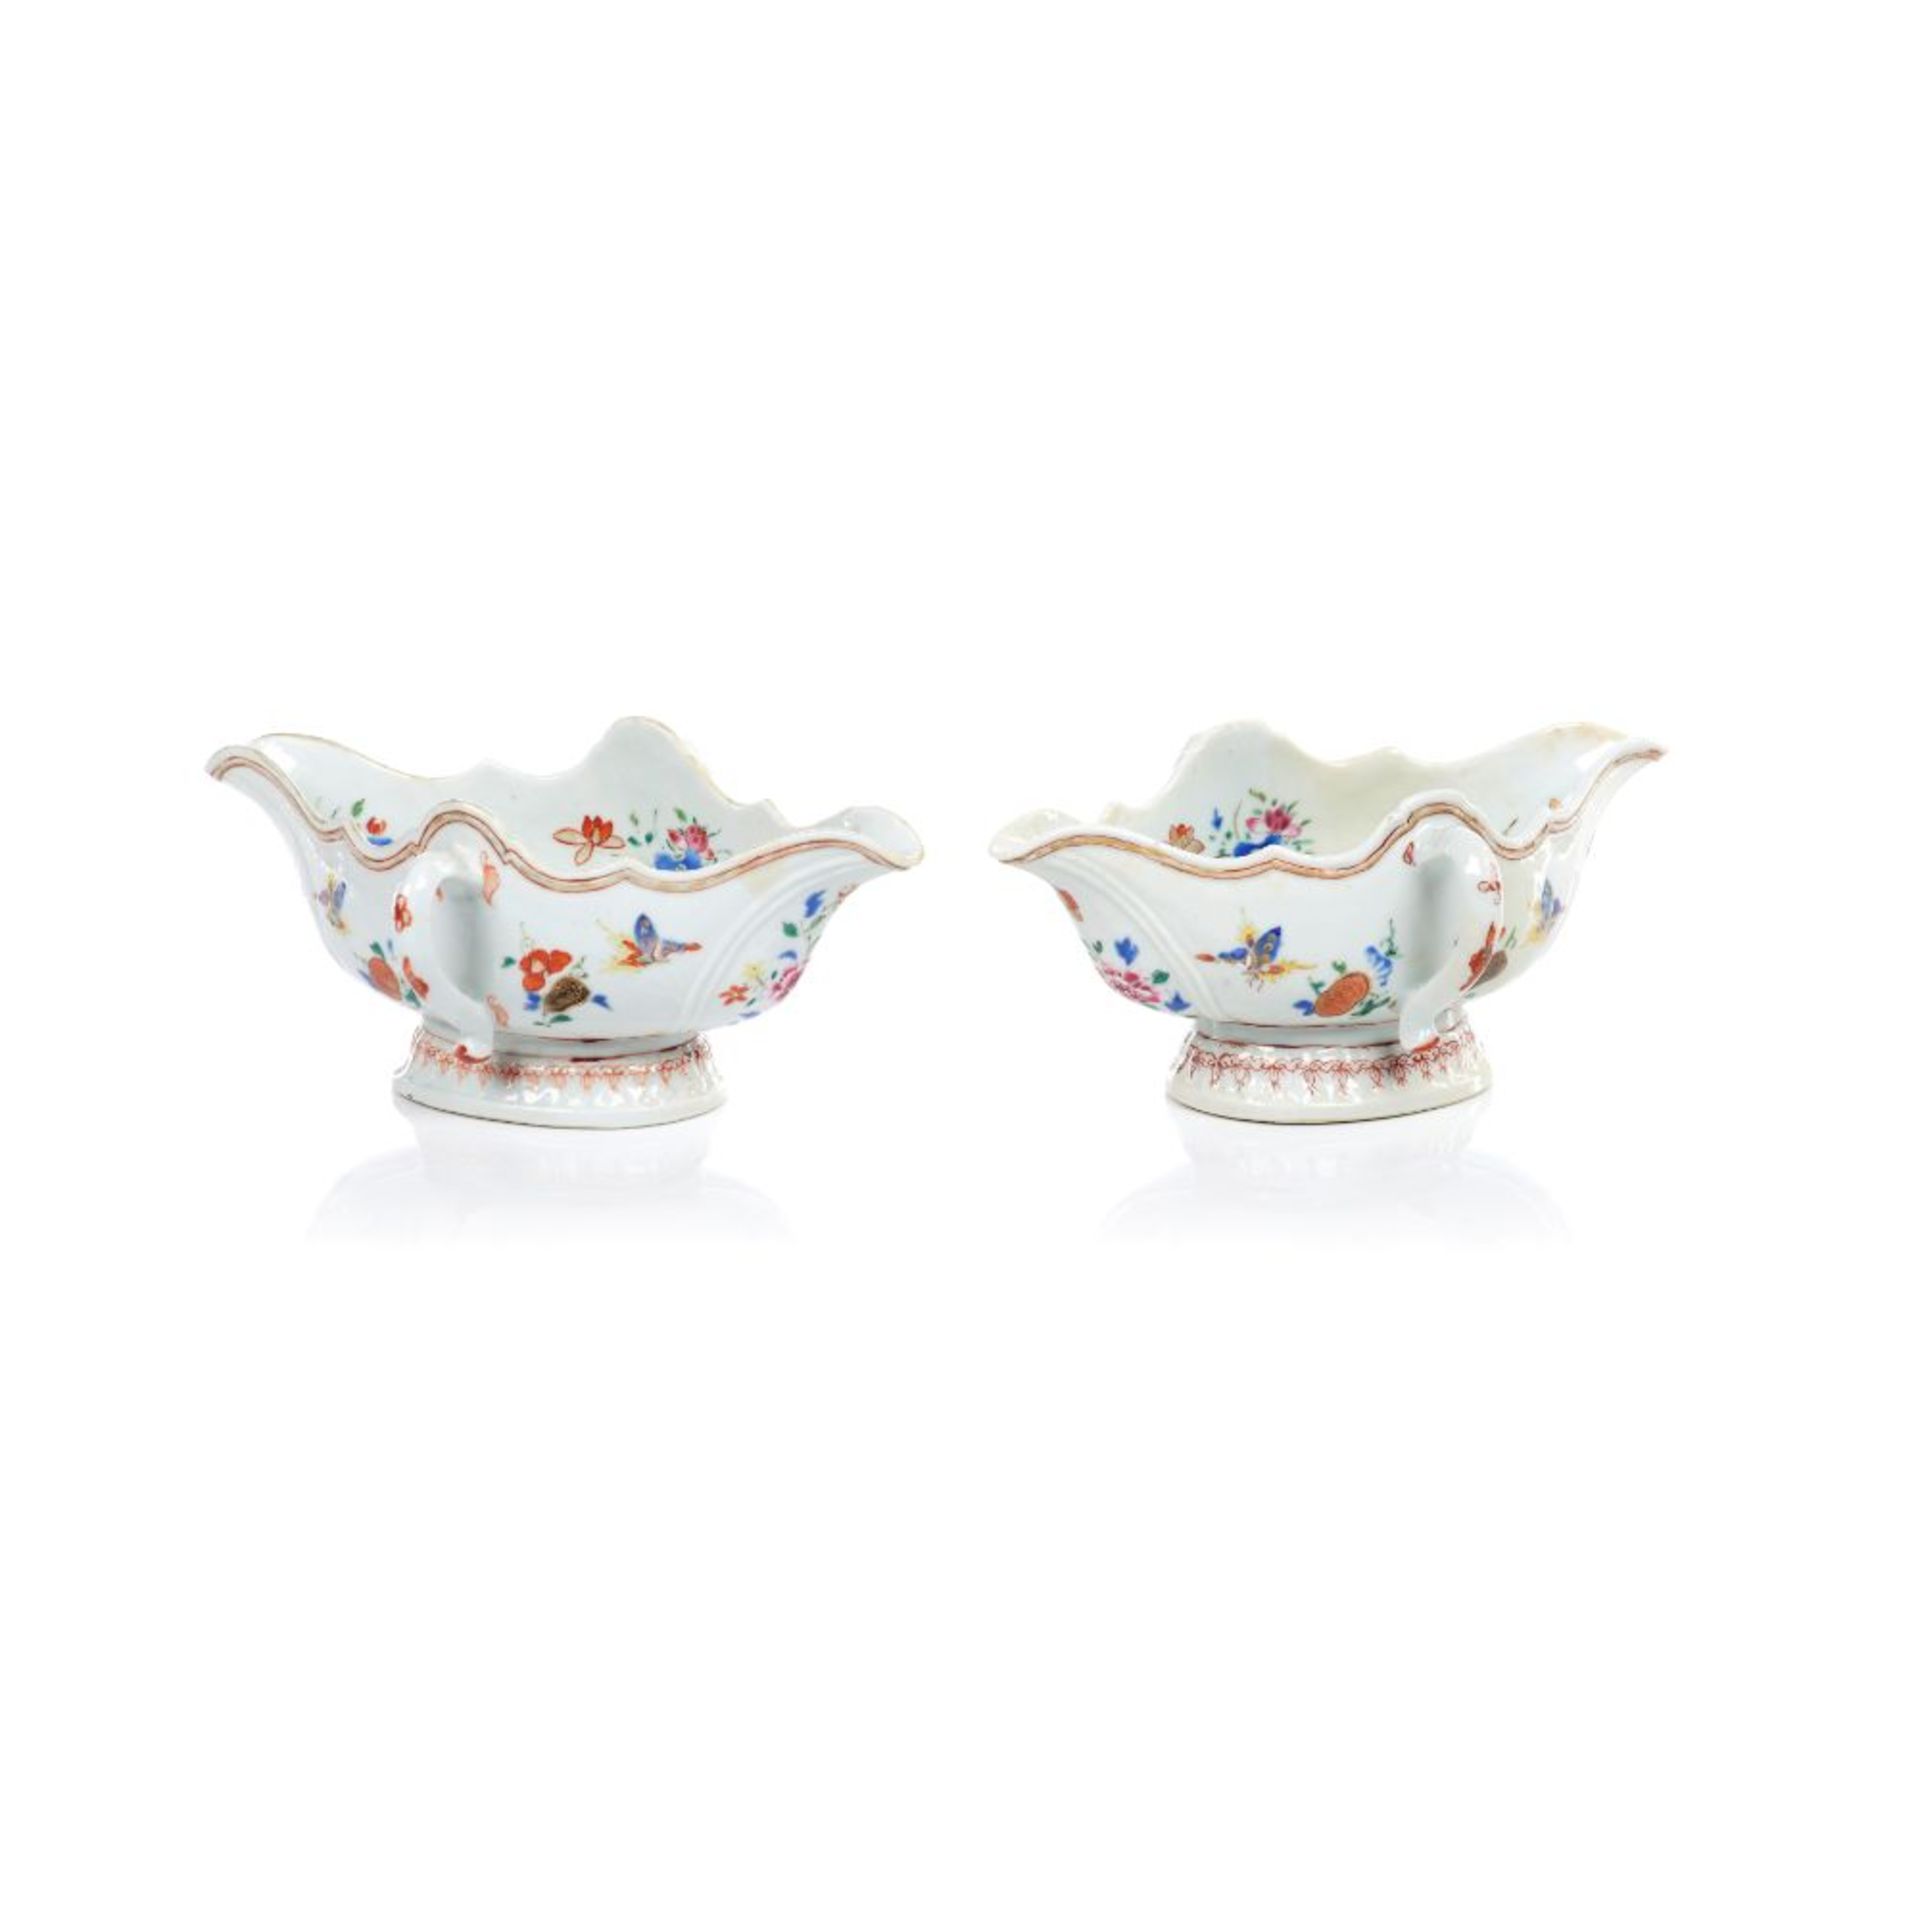 A pair of double handled sauceboats, Chinese export porcelain, Polychrome "Famille Rose" enamelled